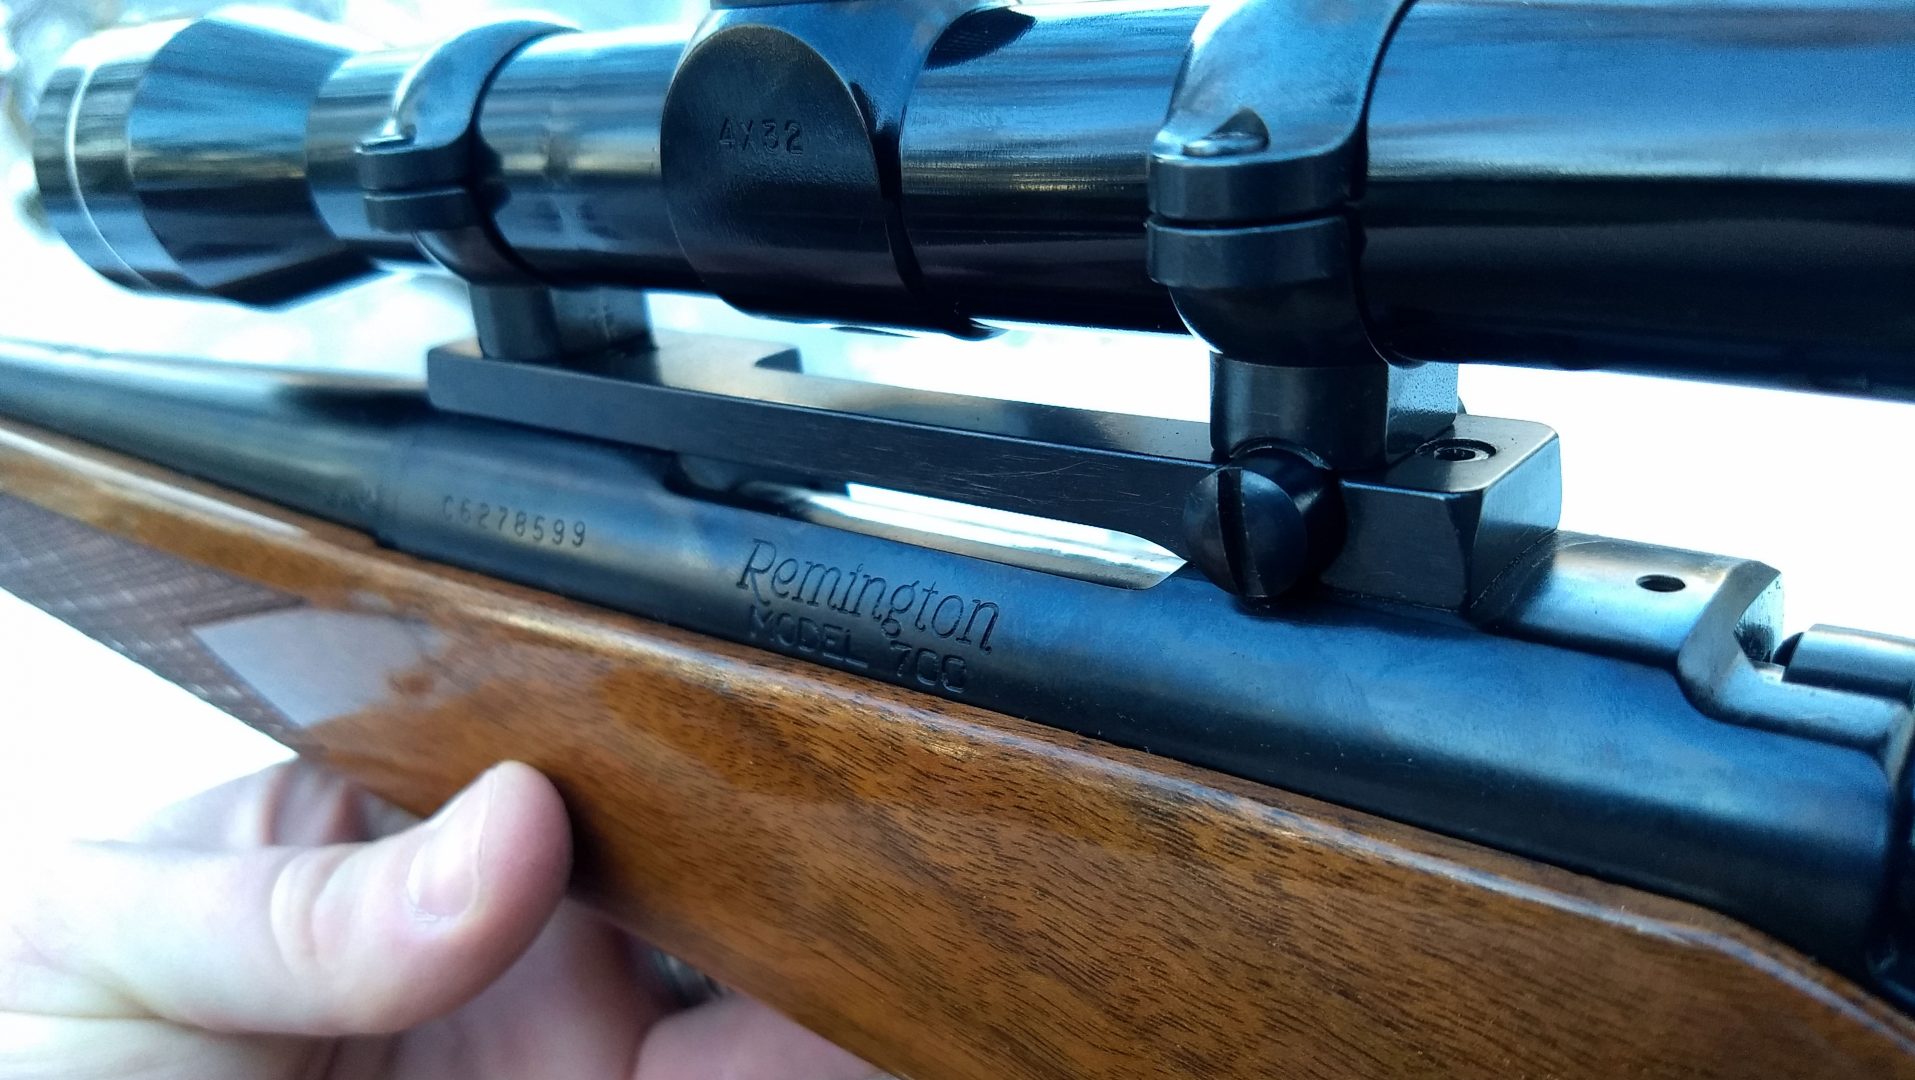 Remington model 700 short action rifle with wood stock